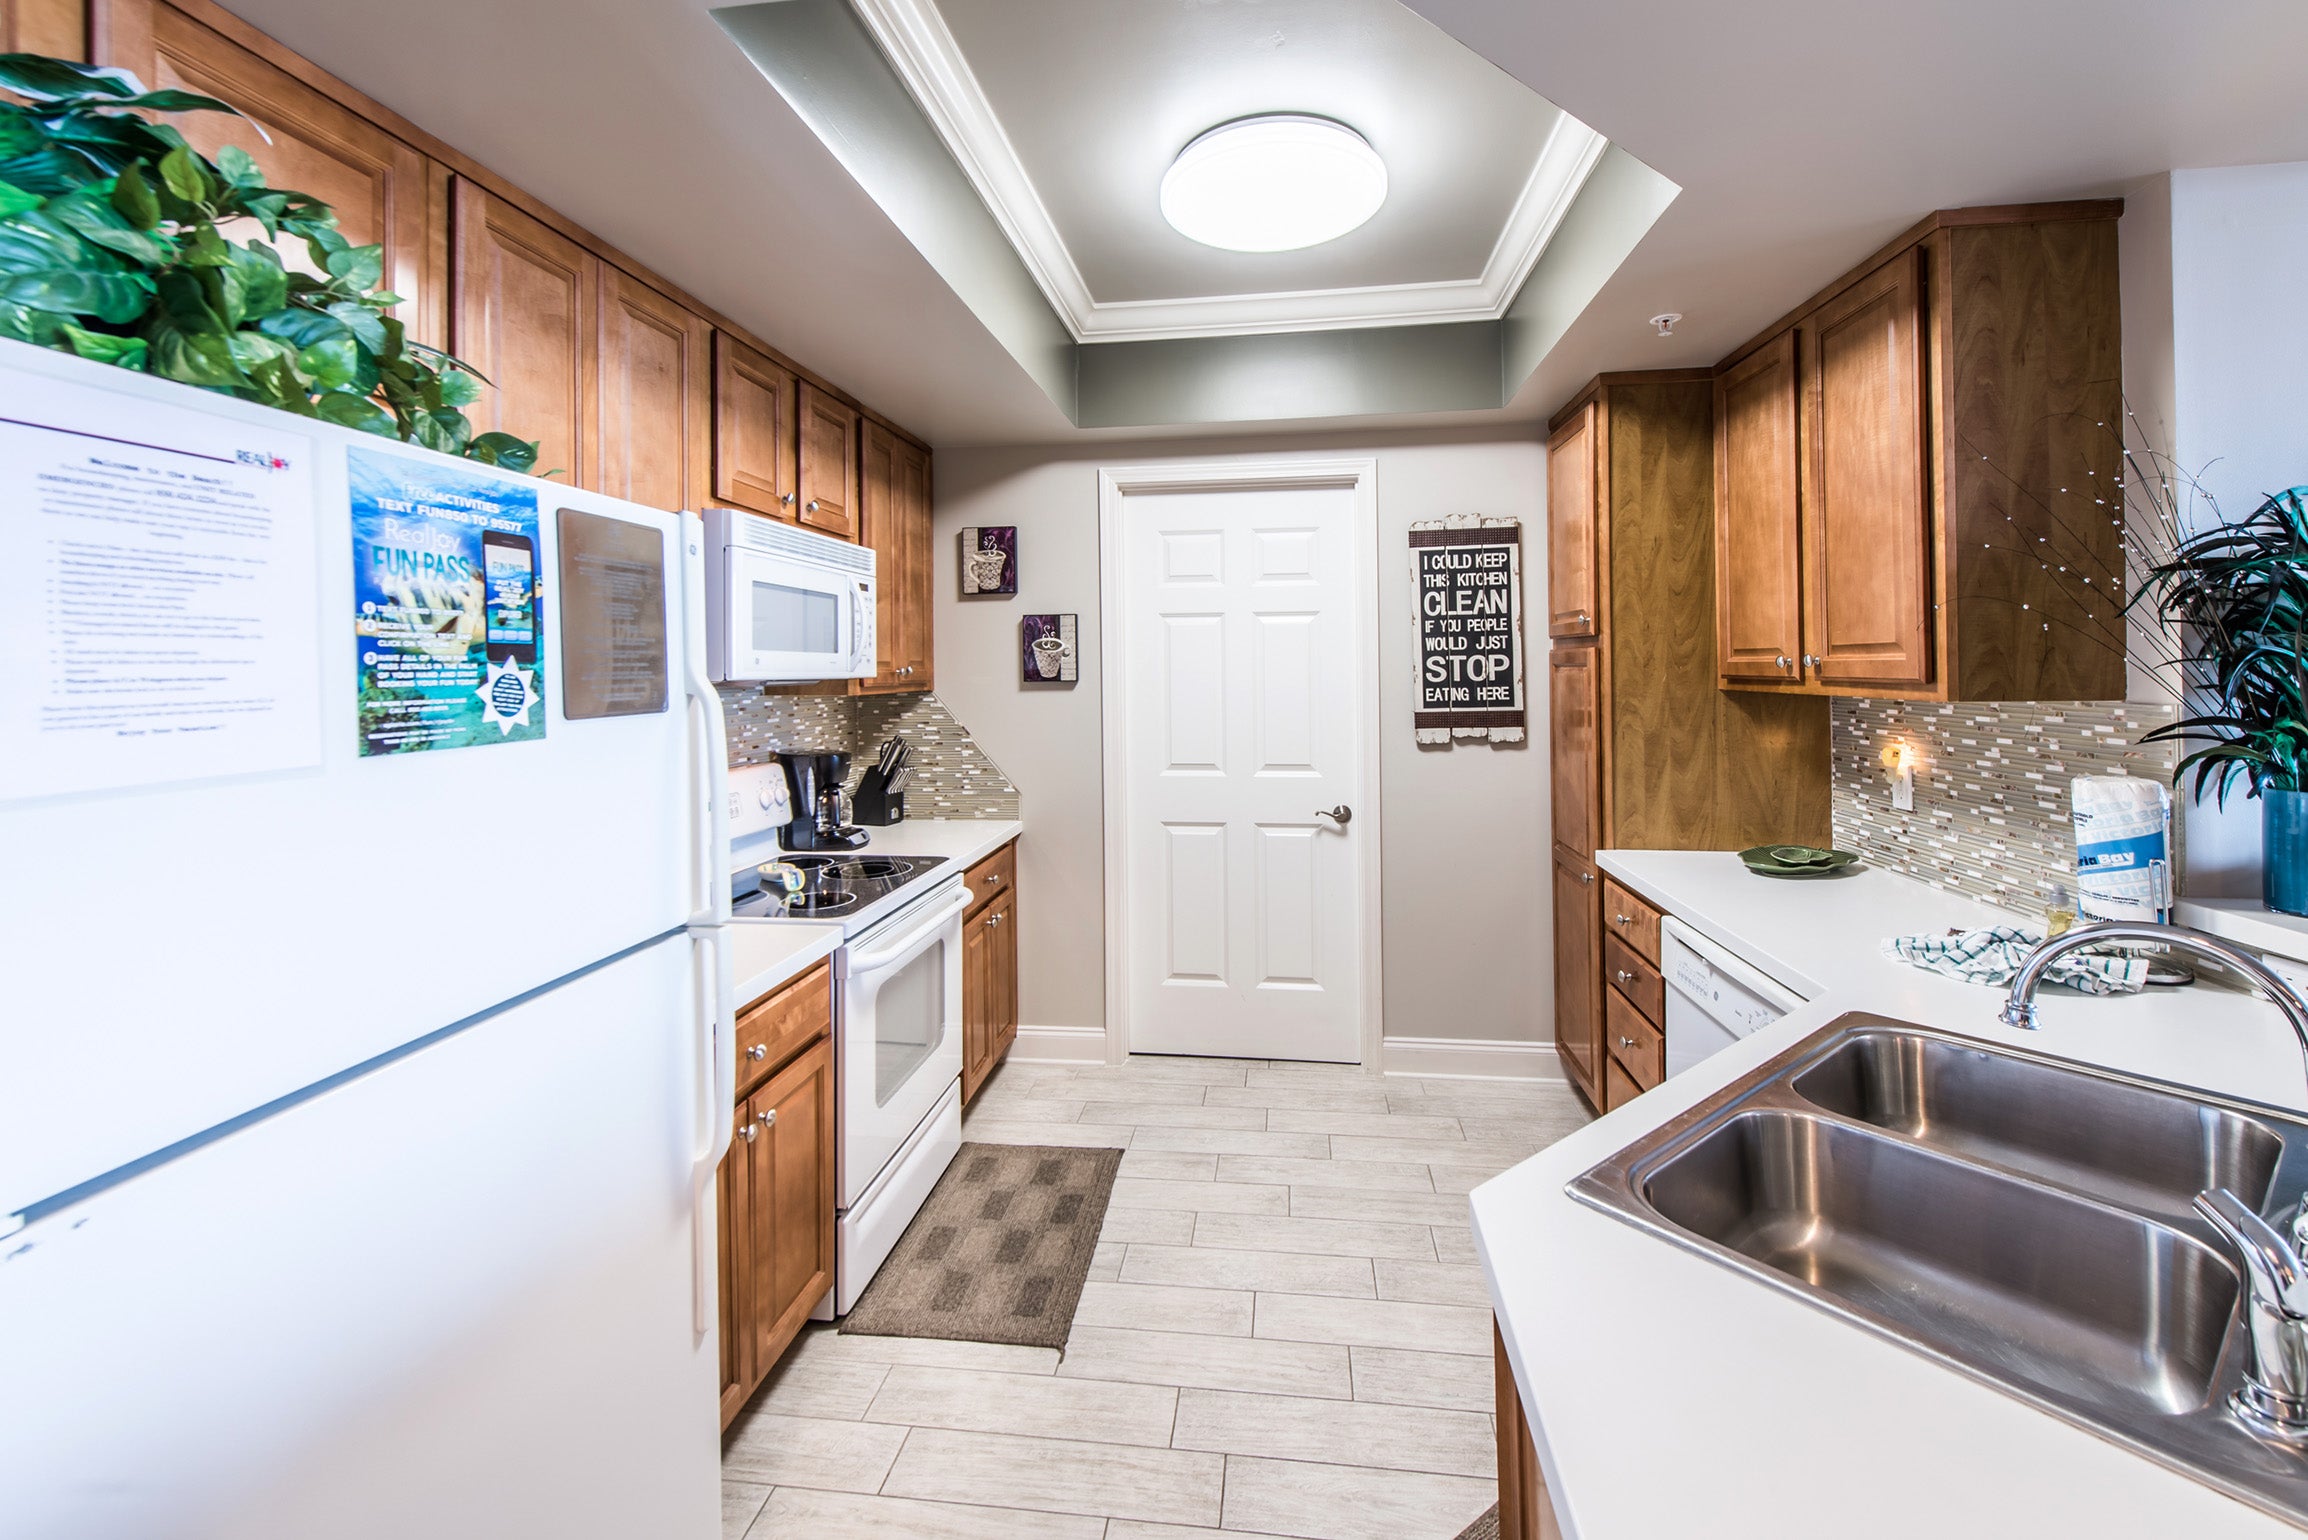 The chef will enjoy this fully equipped kitchen